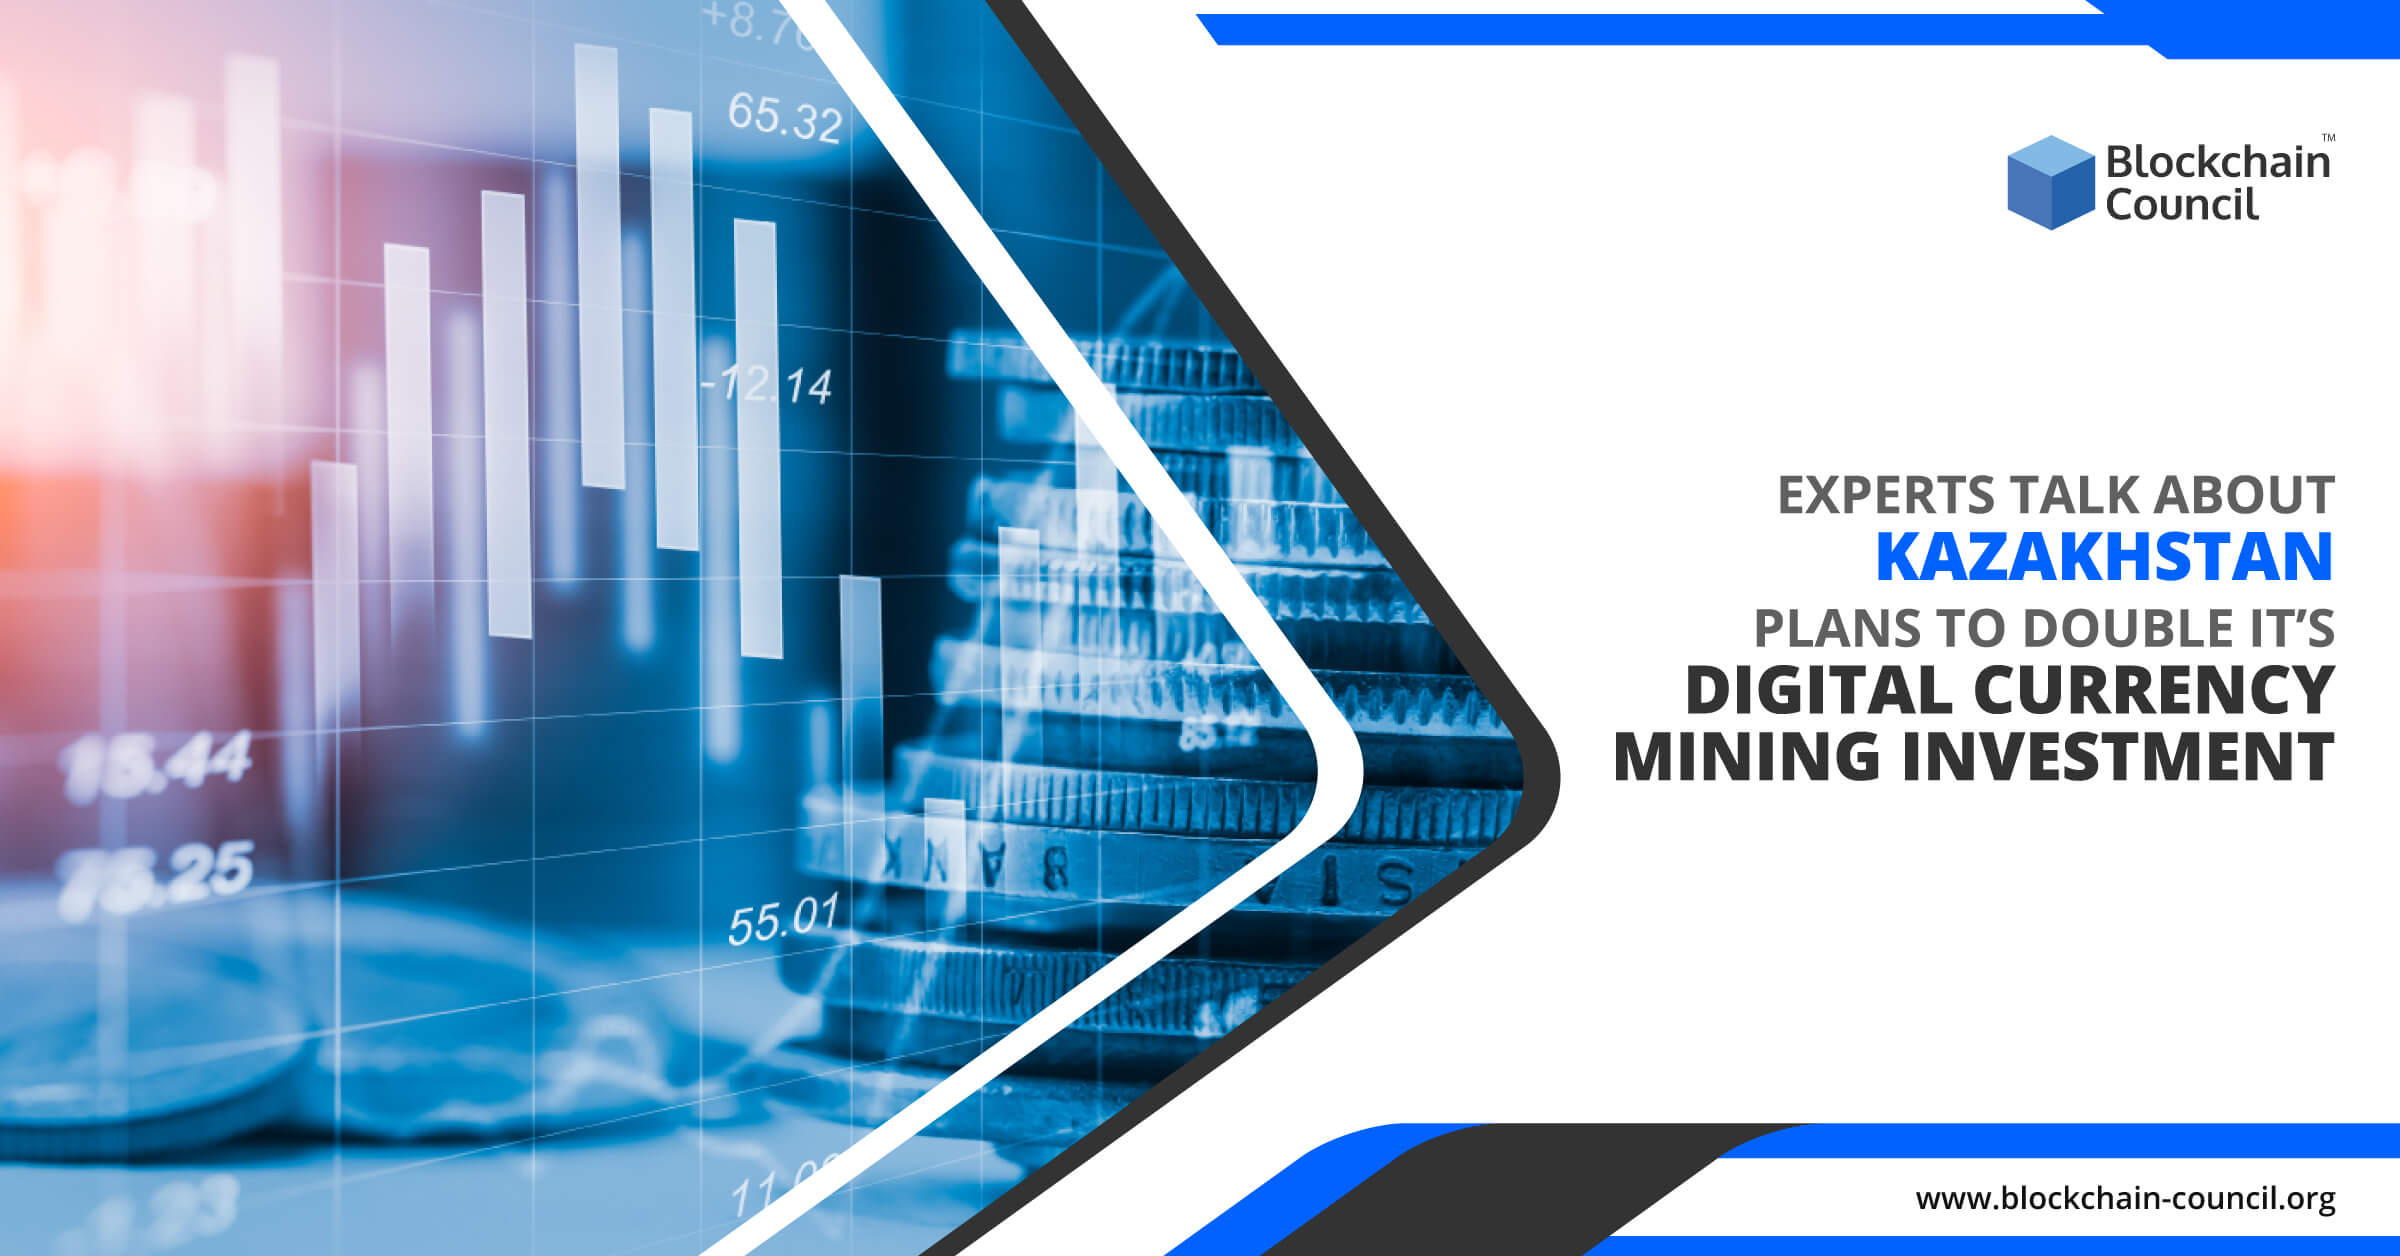 Experts-Talk-About--Kazakhstan-Plans-to-Double-its-Digital-Currency-Mining-Investment